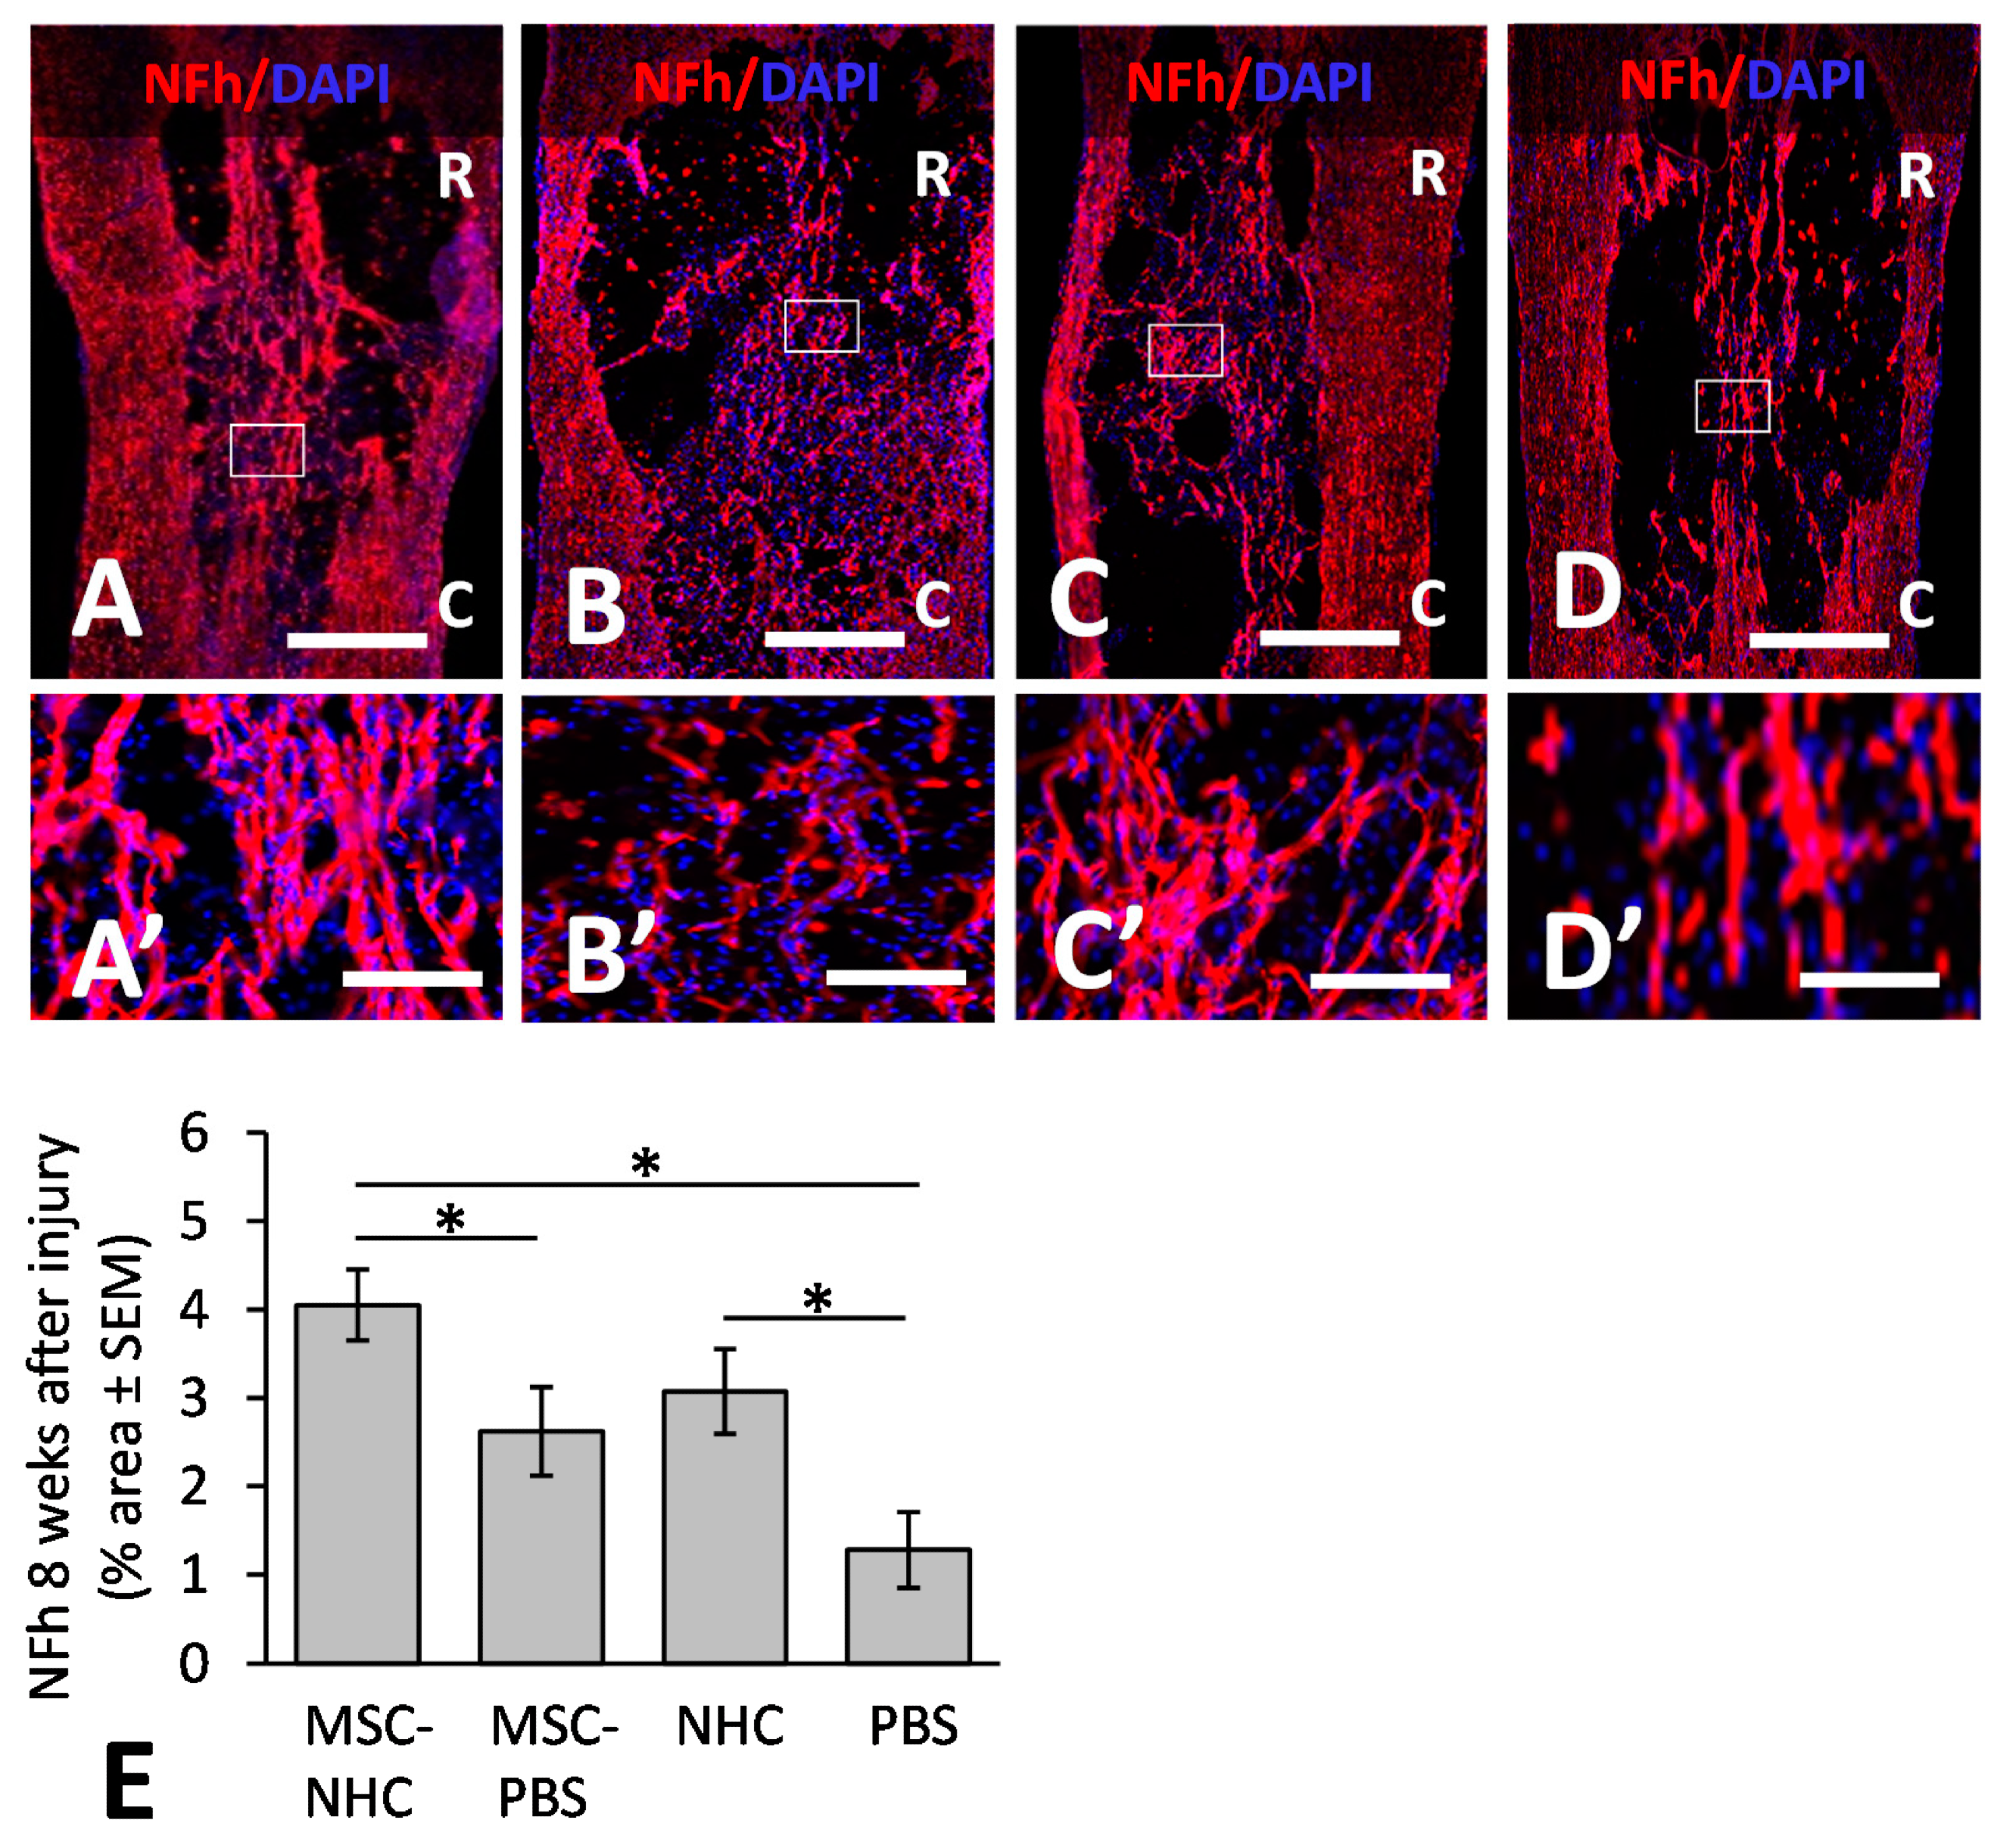 Axon presence in the injury site. Photomicrographs showing axons stained for NFh (red) in the injury site with MSC-NHC (A), MSC-PBS (B), NHC (C), or PBS (D) at 8 weeks after injury. Sections were counterstained with the nucleus marker, DAPI (blue). Images in panels (A’–D’) are enlargements of the outlined area in panels (A–D), respectively. The scale bar in (A–D ) is 450 µm. Scale bar in (A’,C’) is 125 µm, and 115 µm in (B’,D’). In (A–D), the rostral (R) and caudal (C) orientation of the horizontal sections are indicated. (E) Bar graph of the percentage area of injury site positive for NFh at 8 weeks after injury. There were significantly more NFh+ axons in the injury site with MSC-NHC compared with MSC-PBS and PBS only. Asterisks indicates p < 0.05. Bars in the graph represent SEM. Abbreviations: DAPI = 4